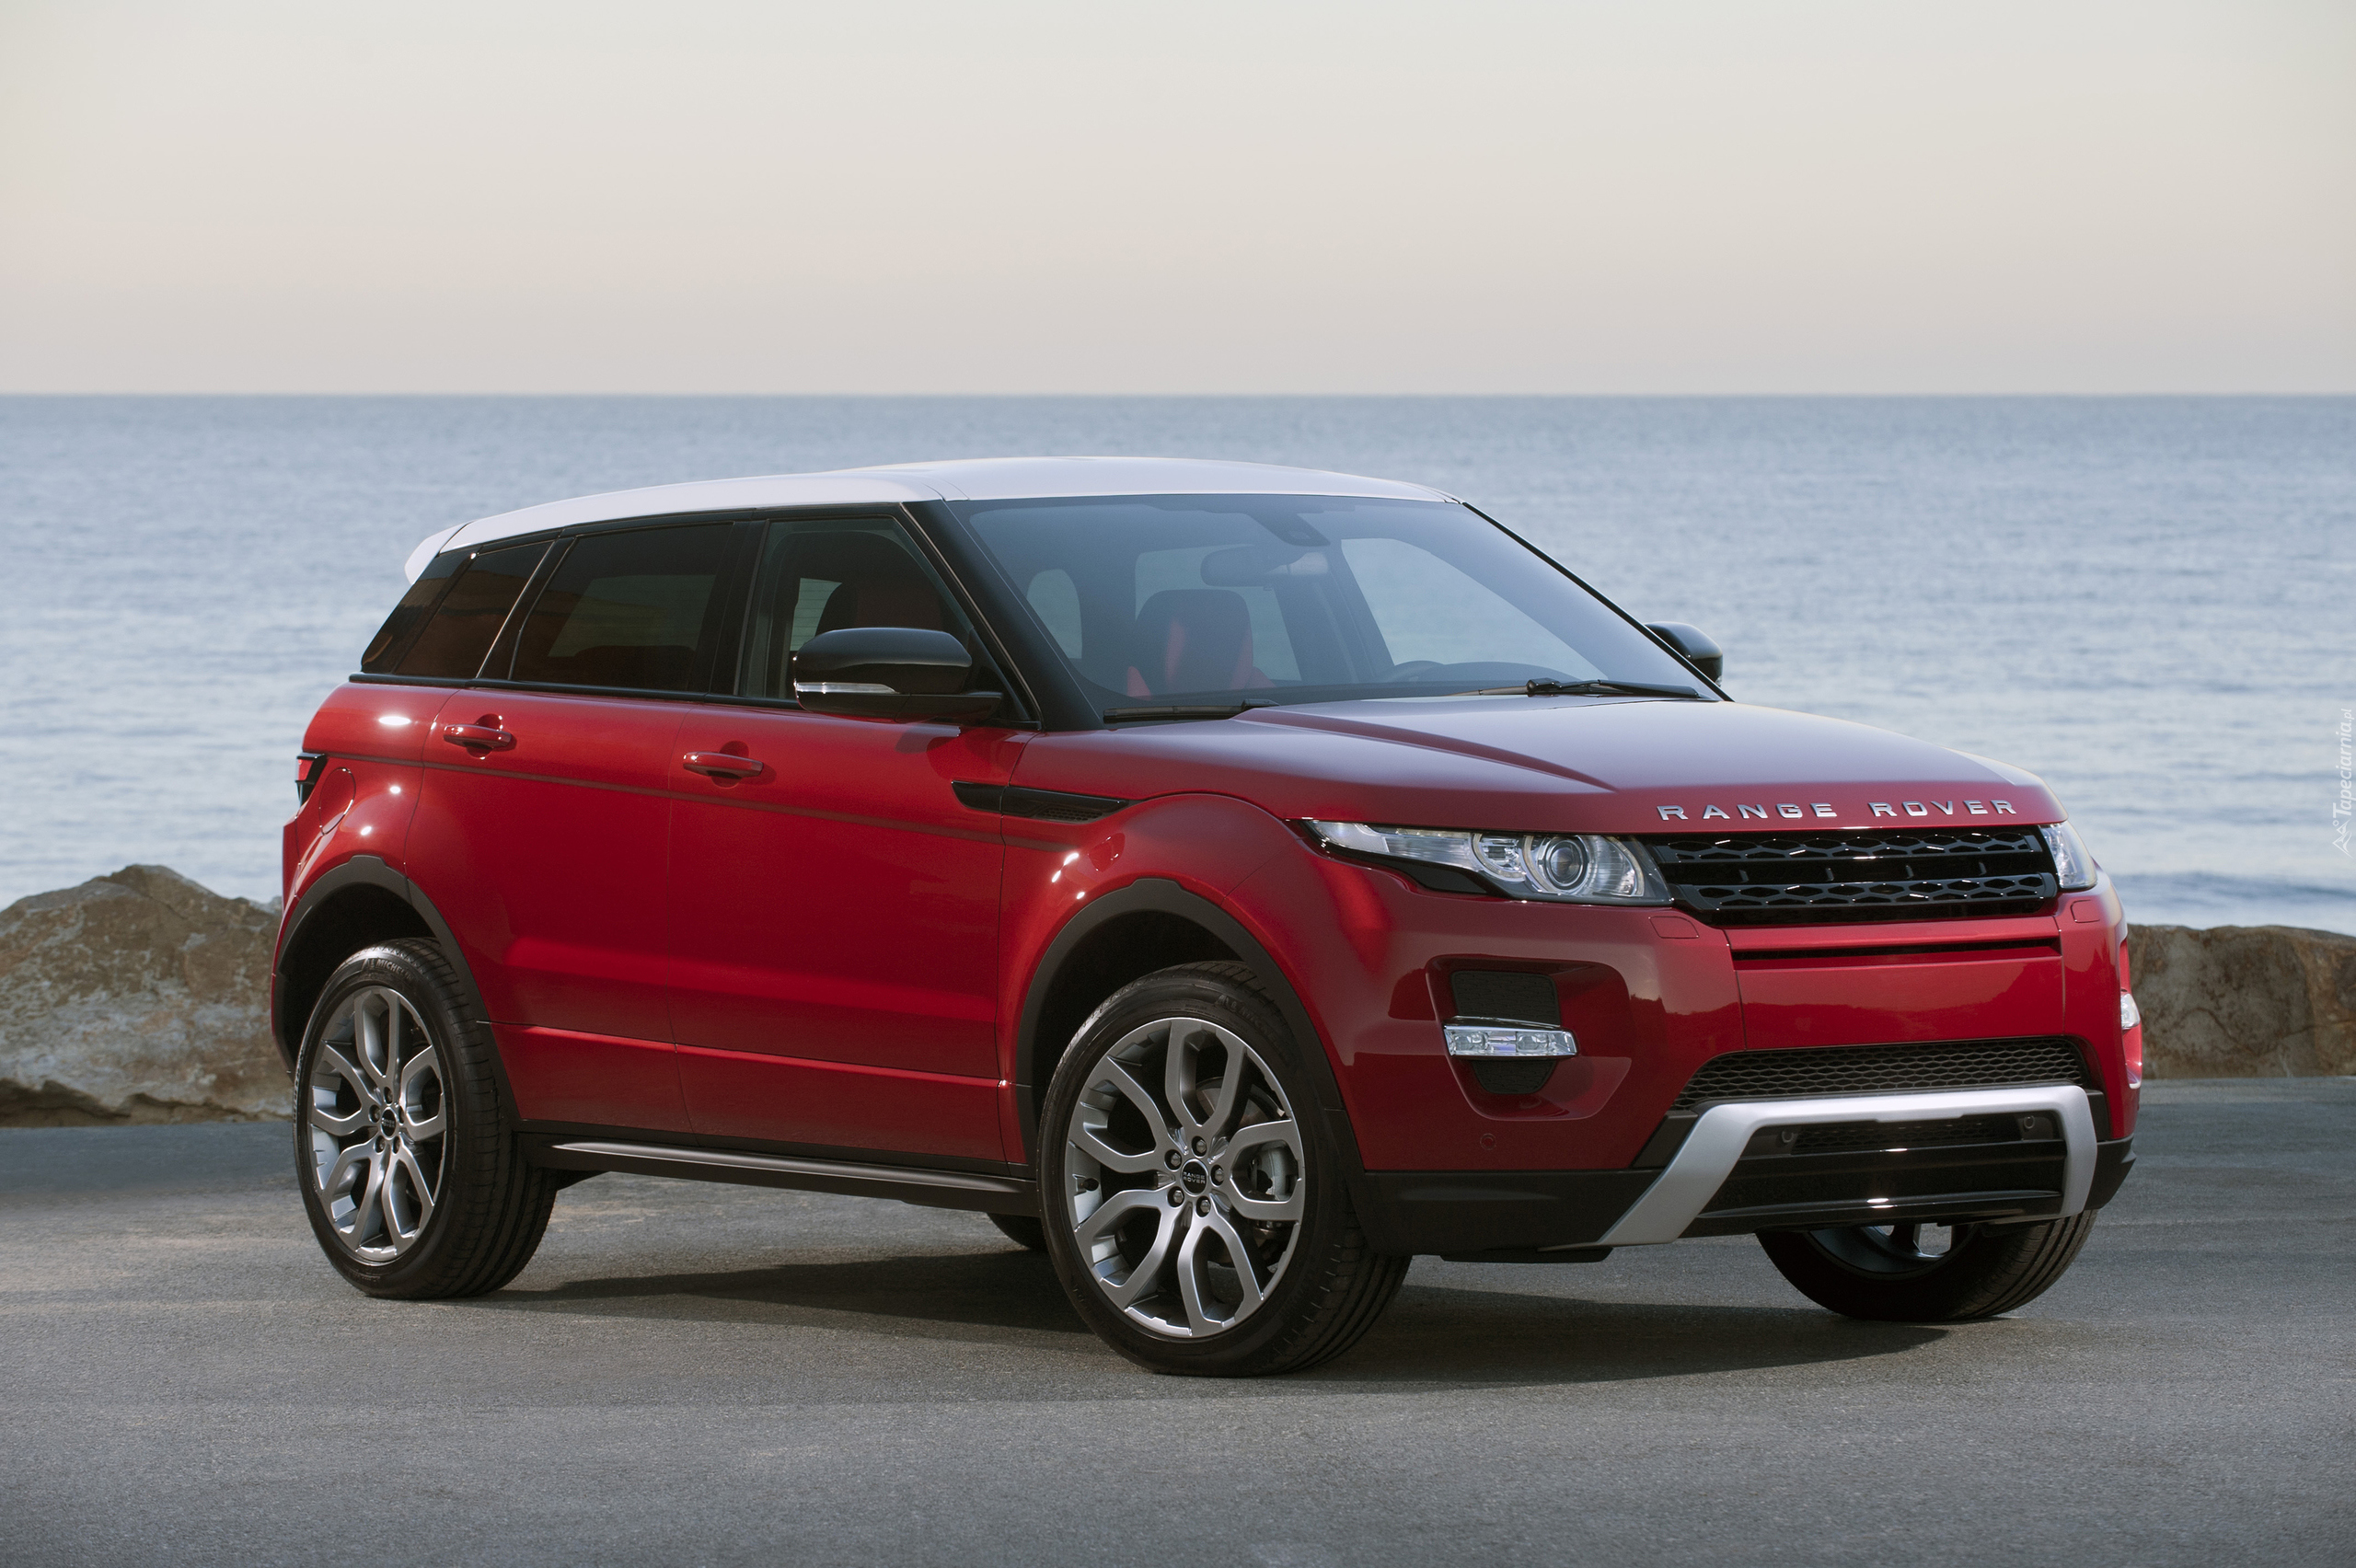 Land Rover, Range Rover Caractere Exclusive